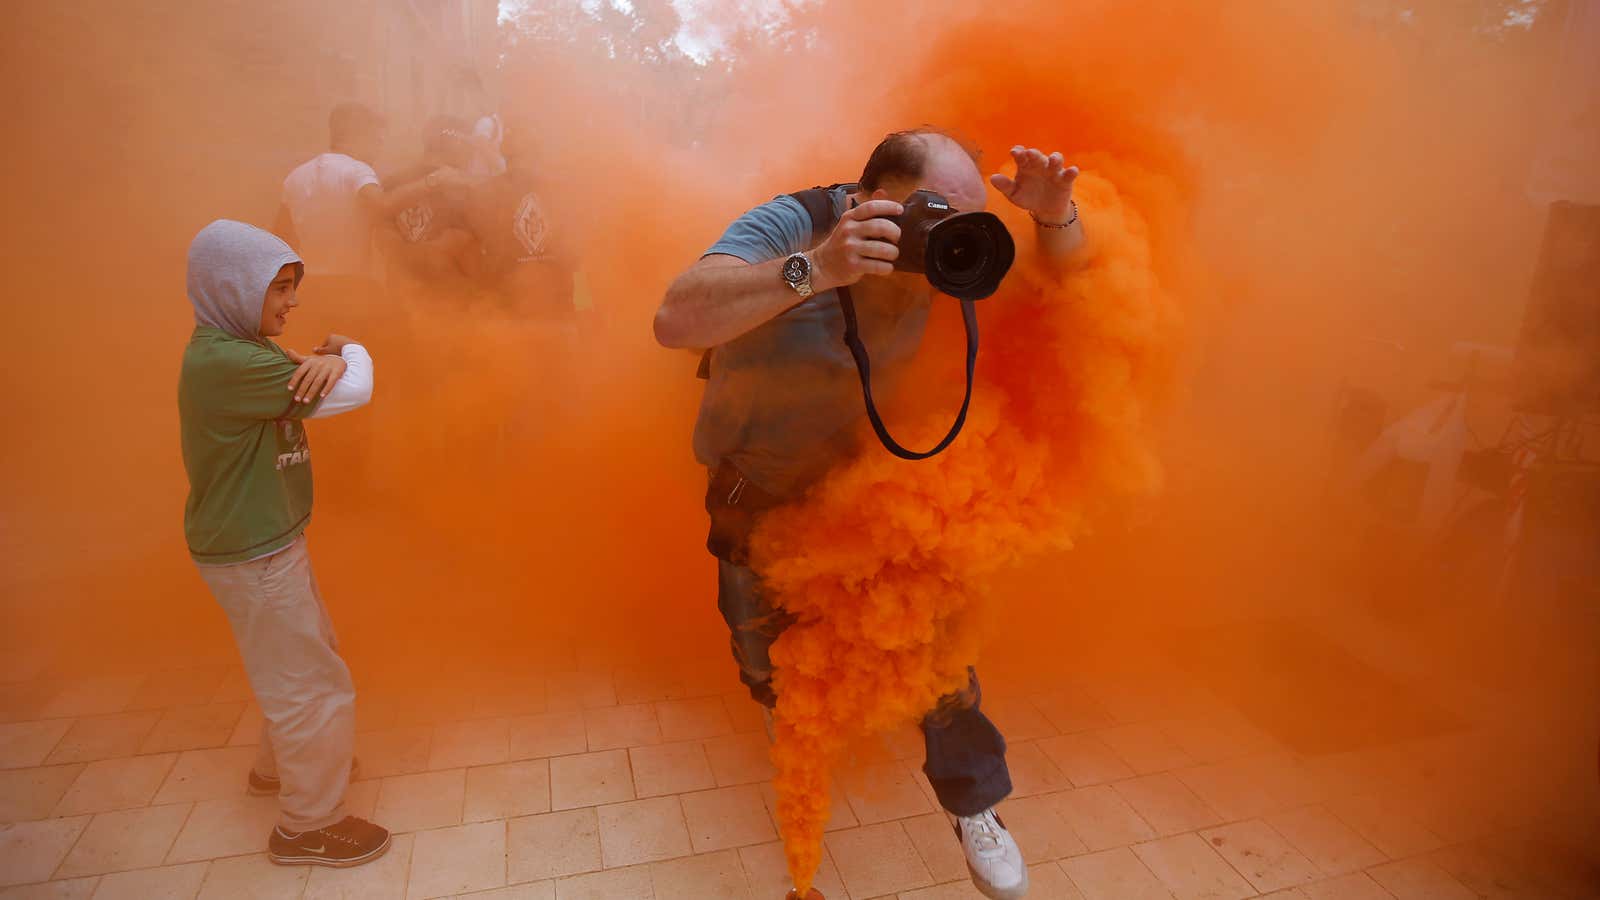 A photographer jumps over a smoke canister during a demonstration.